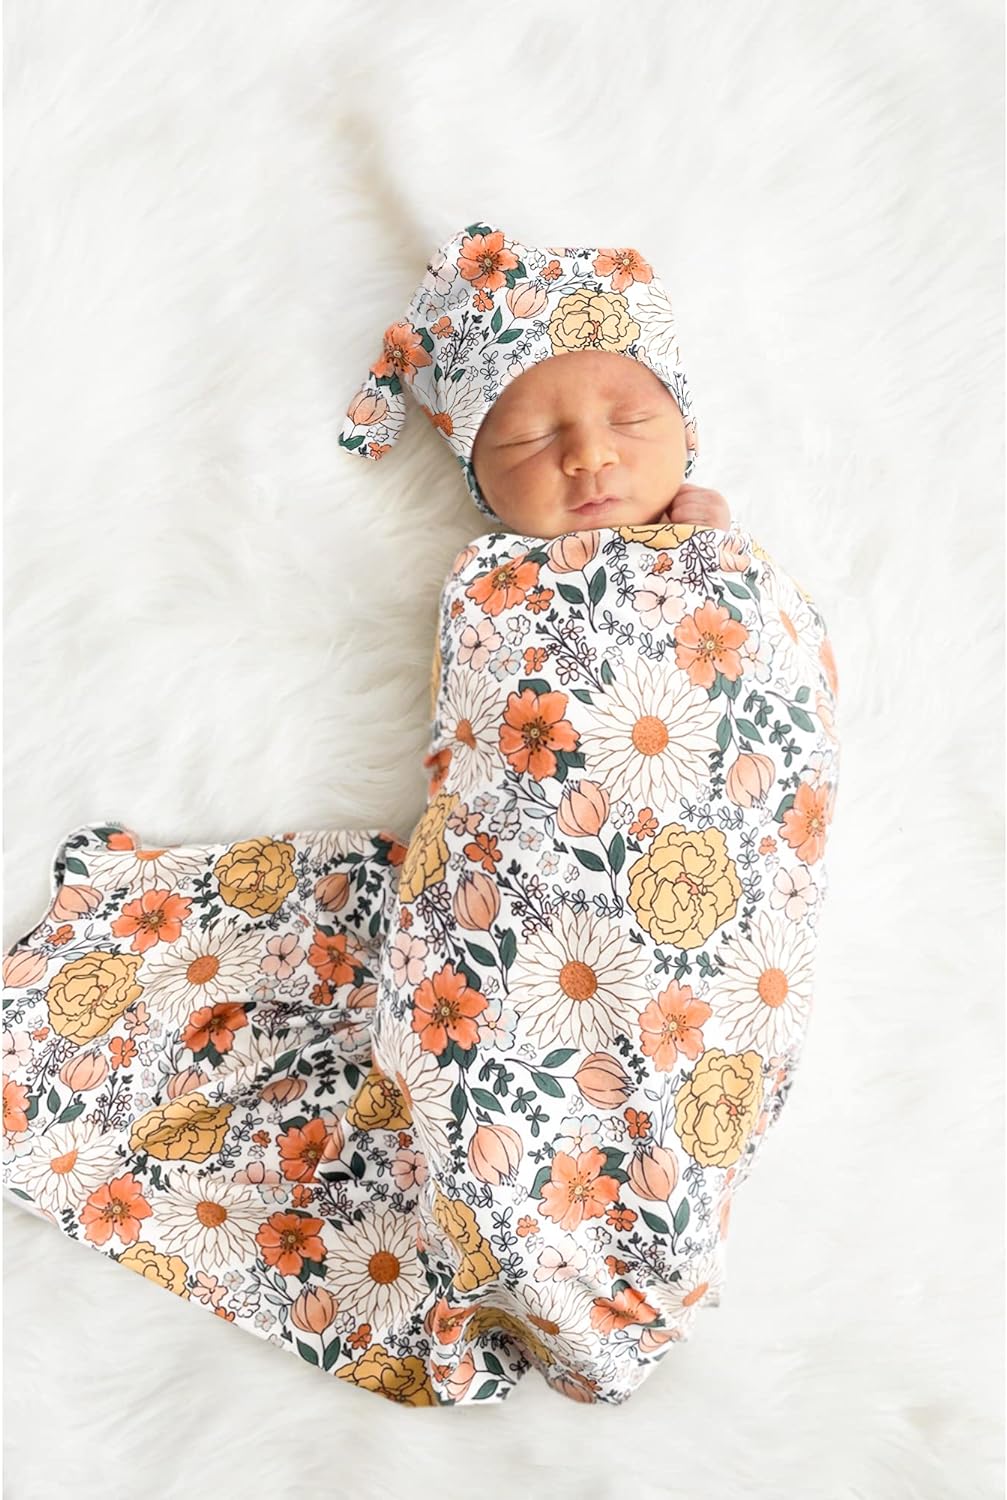 Konssy Baby Girl Newborn Receiving Blanket with Matching Headband and Beanie Set Baby Swaddle Floral Print Nursery Swaddle Wrap